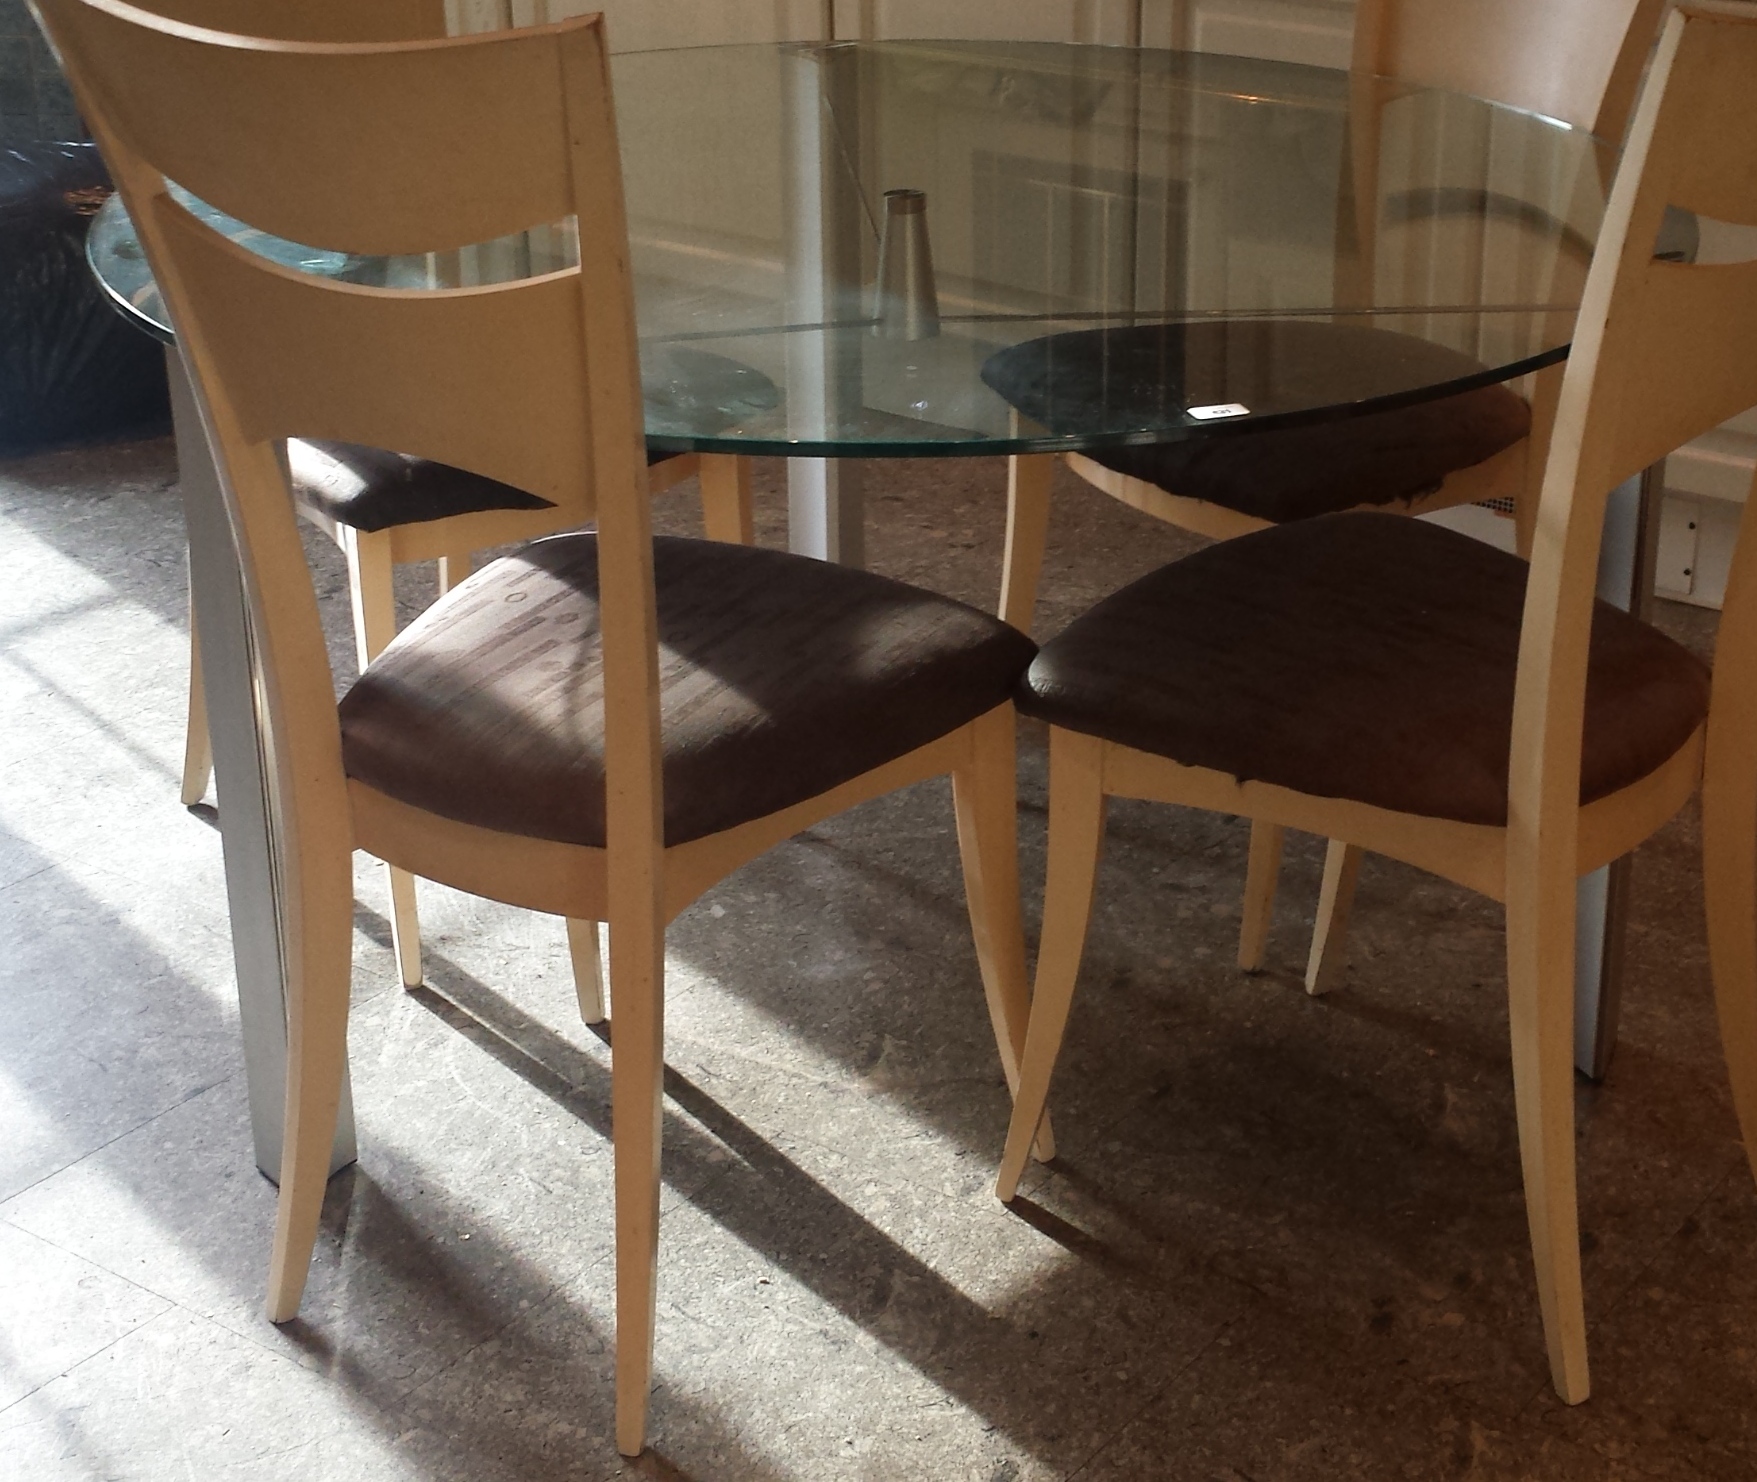 A Circular Designer Glass Kitchen Table & Six Contemporary Suede Dining Chairs (three brown &